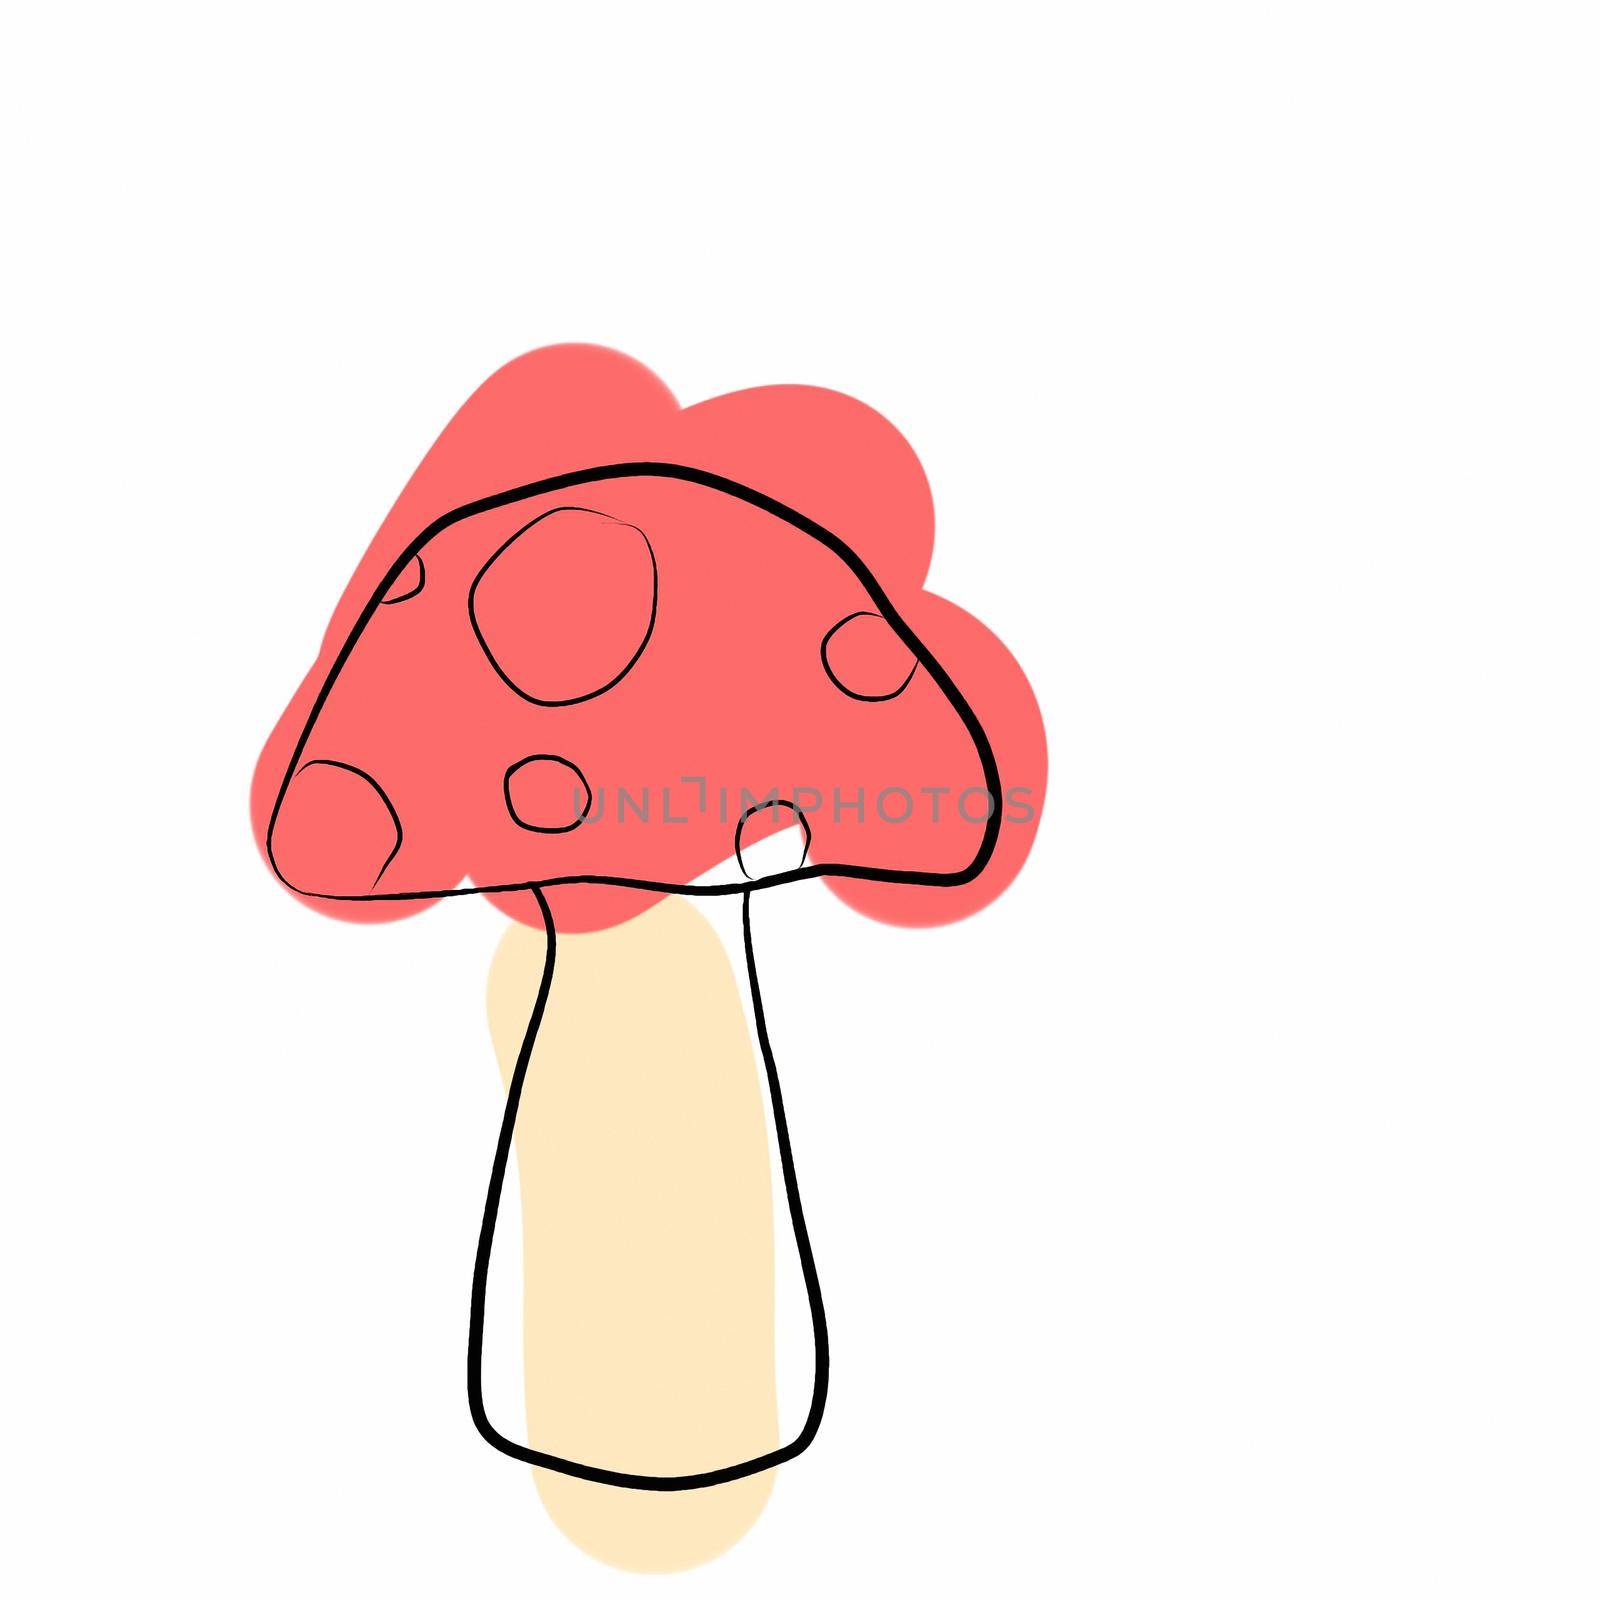 Non-toxic cartoon red mushroom on white background by profmon